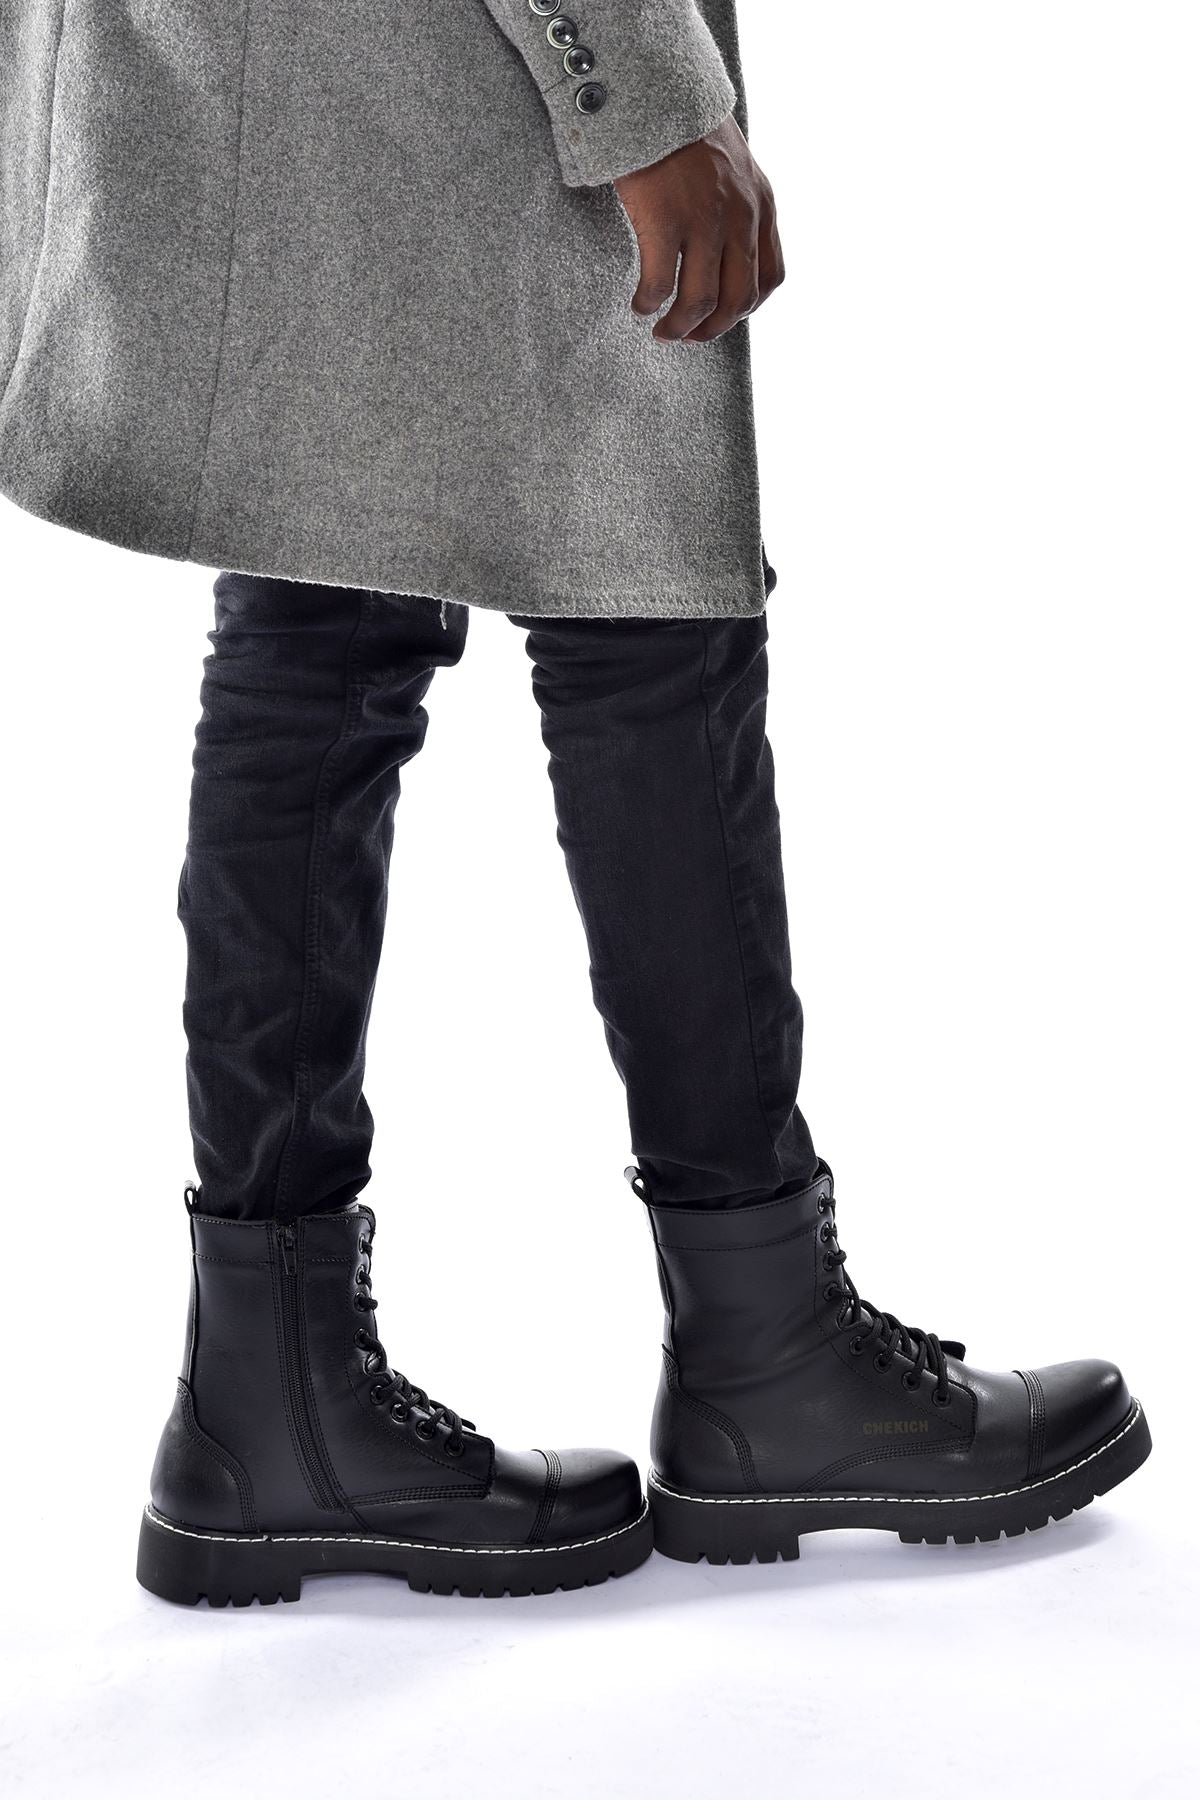 CH009 Men's Leather Black-Black Sole Casual Winter Boots - STREETMODE ™